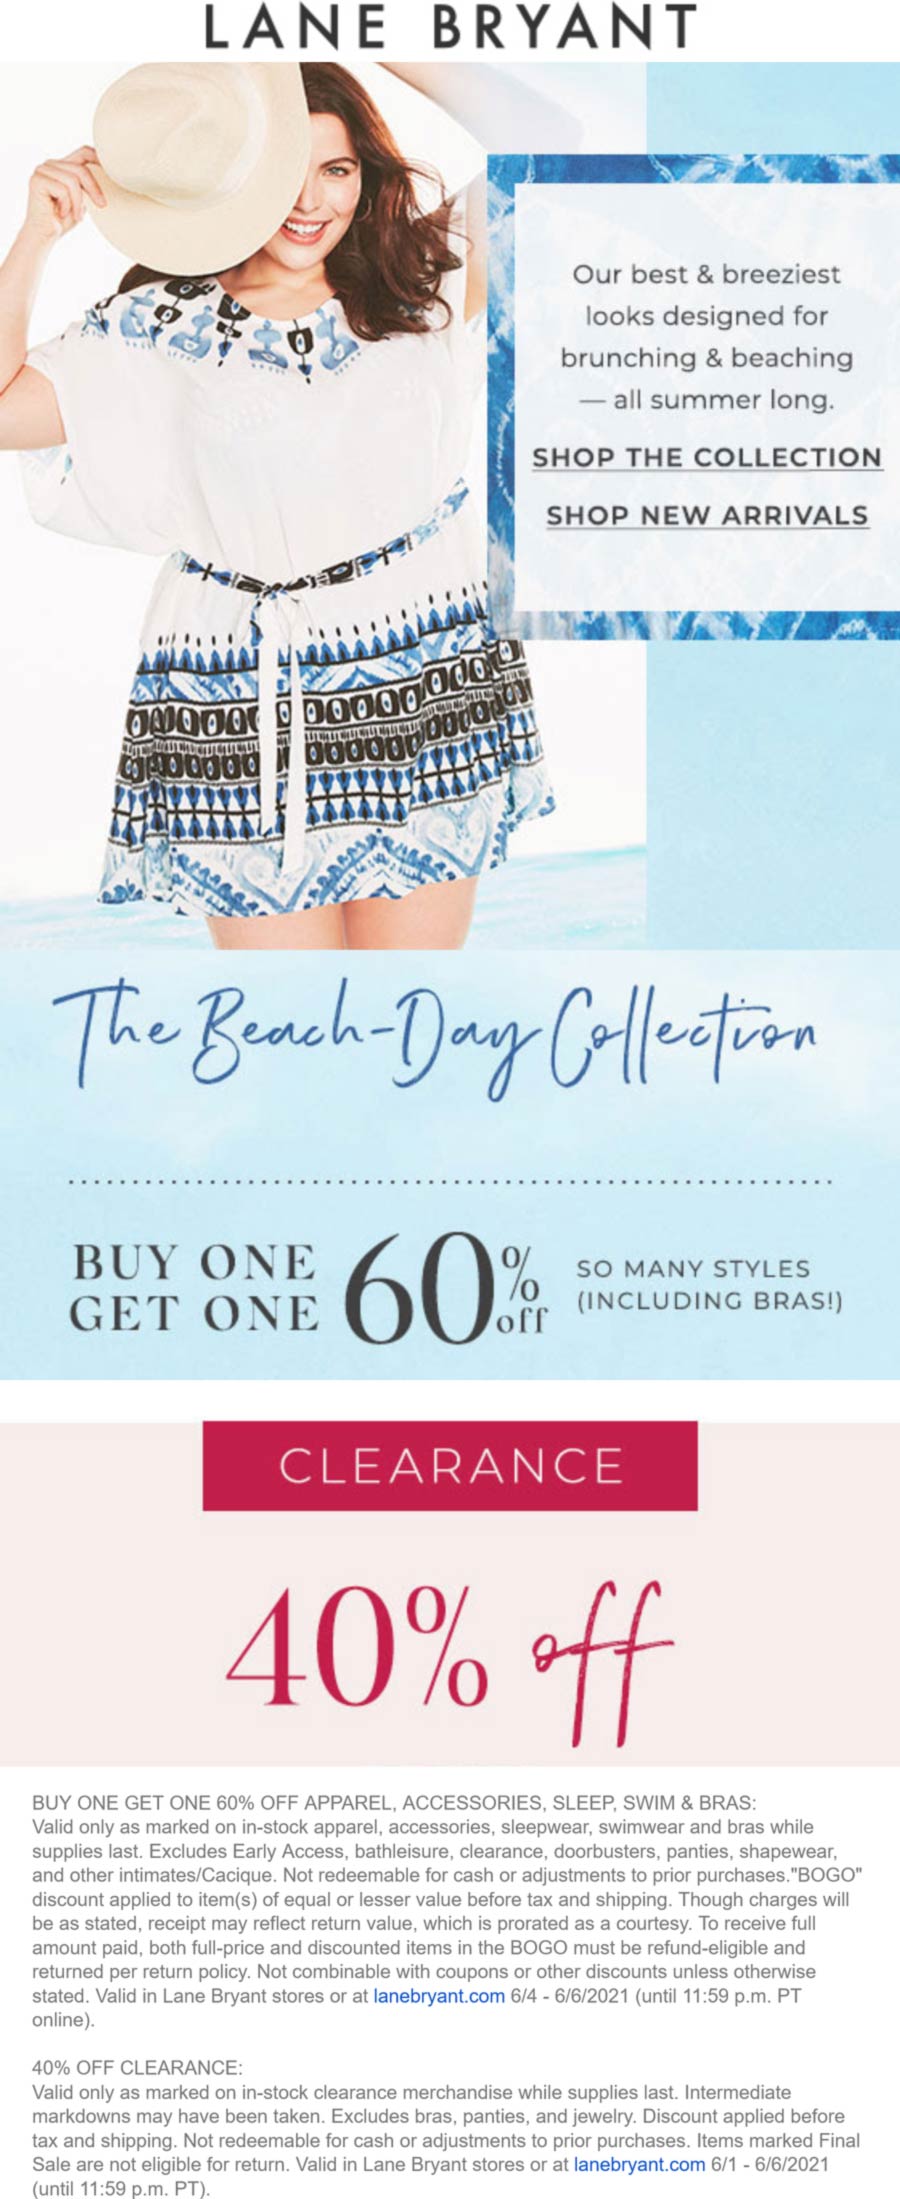 Lane Bryant stores Coupon  Second item 60% off also 40% off clearance at Lane Bryant, ditto online #lanebryant 